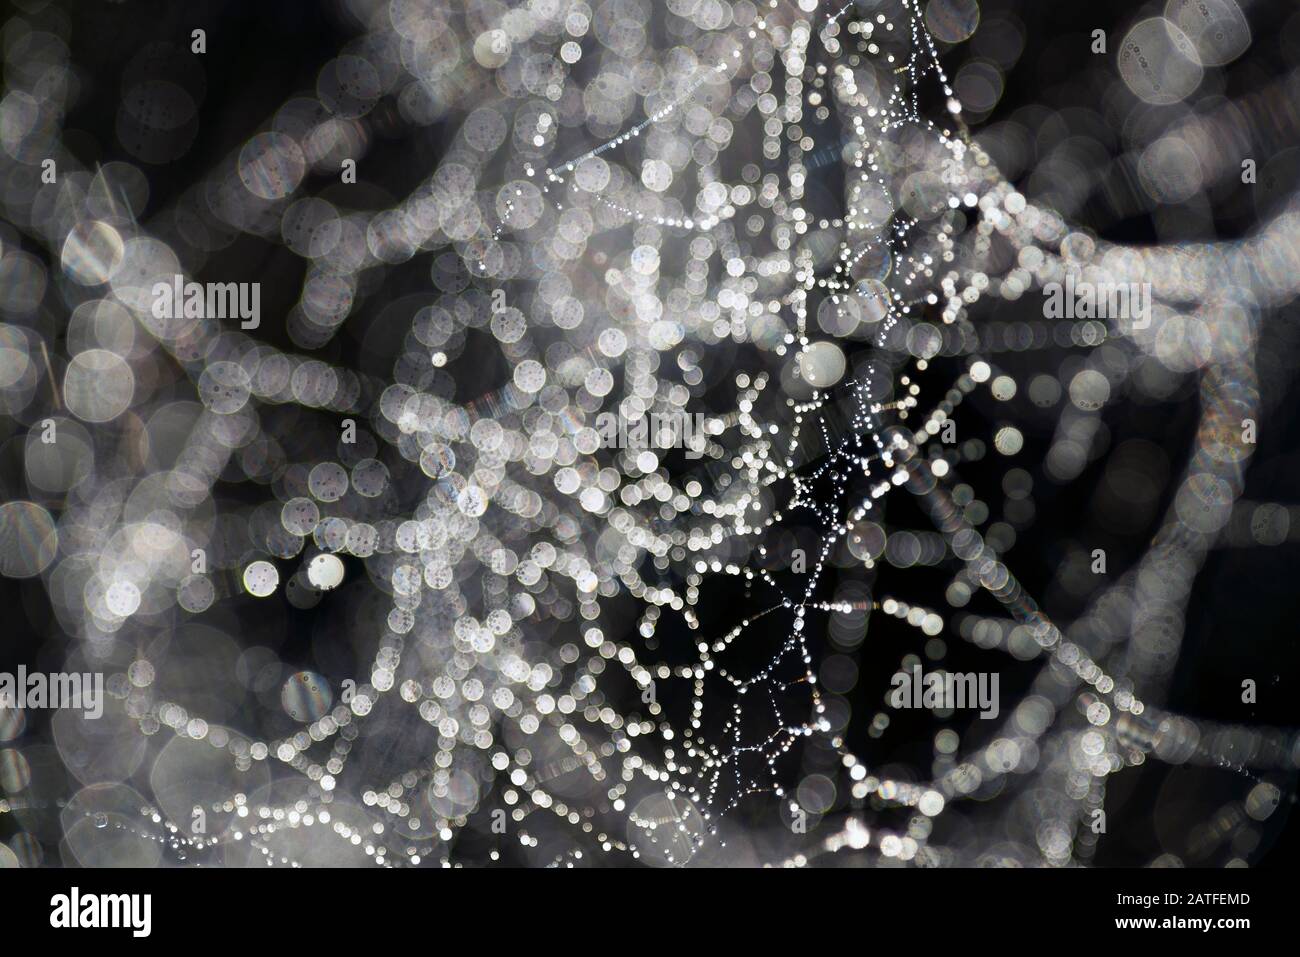 Close up shot of a spider web with water drops on a black background. Stock Photo